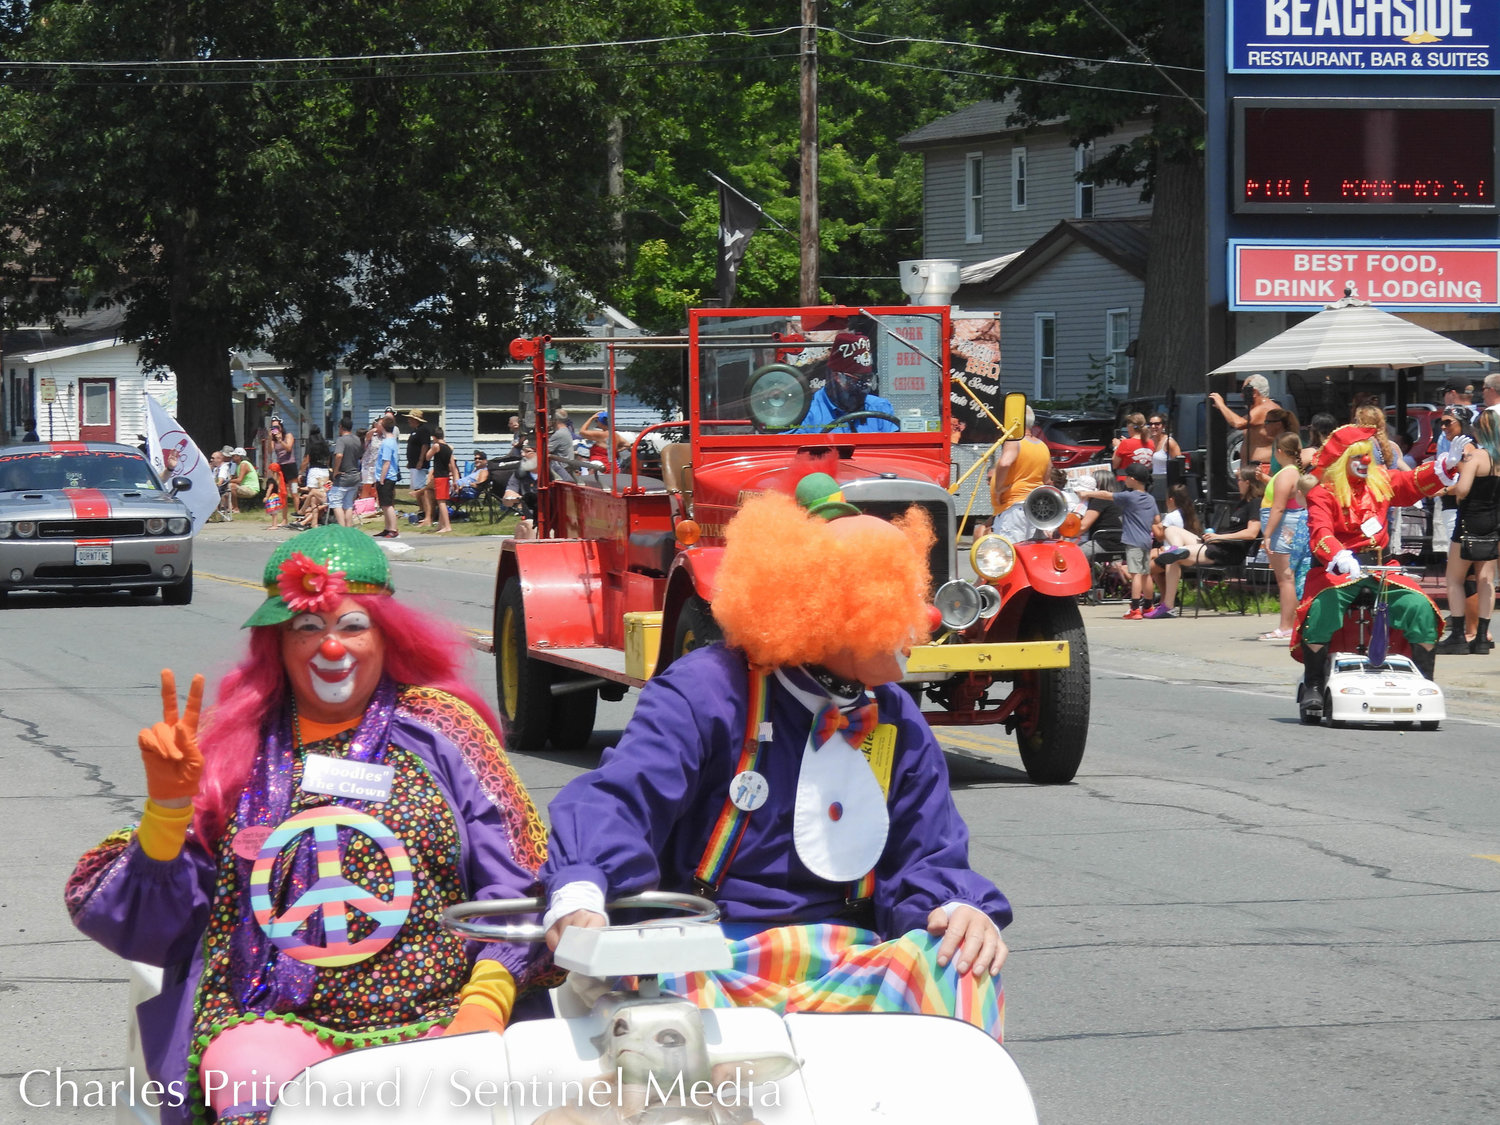 The Sylvan Beach Pirate's Parade makes its way down Main Street. Pictured are clowns in the Pirate's Parade earning laughs and giggles from parents and children alike as they zoom around the parade.